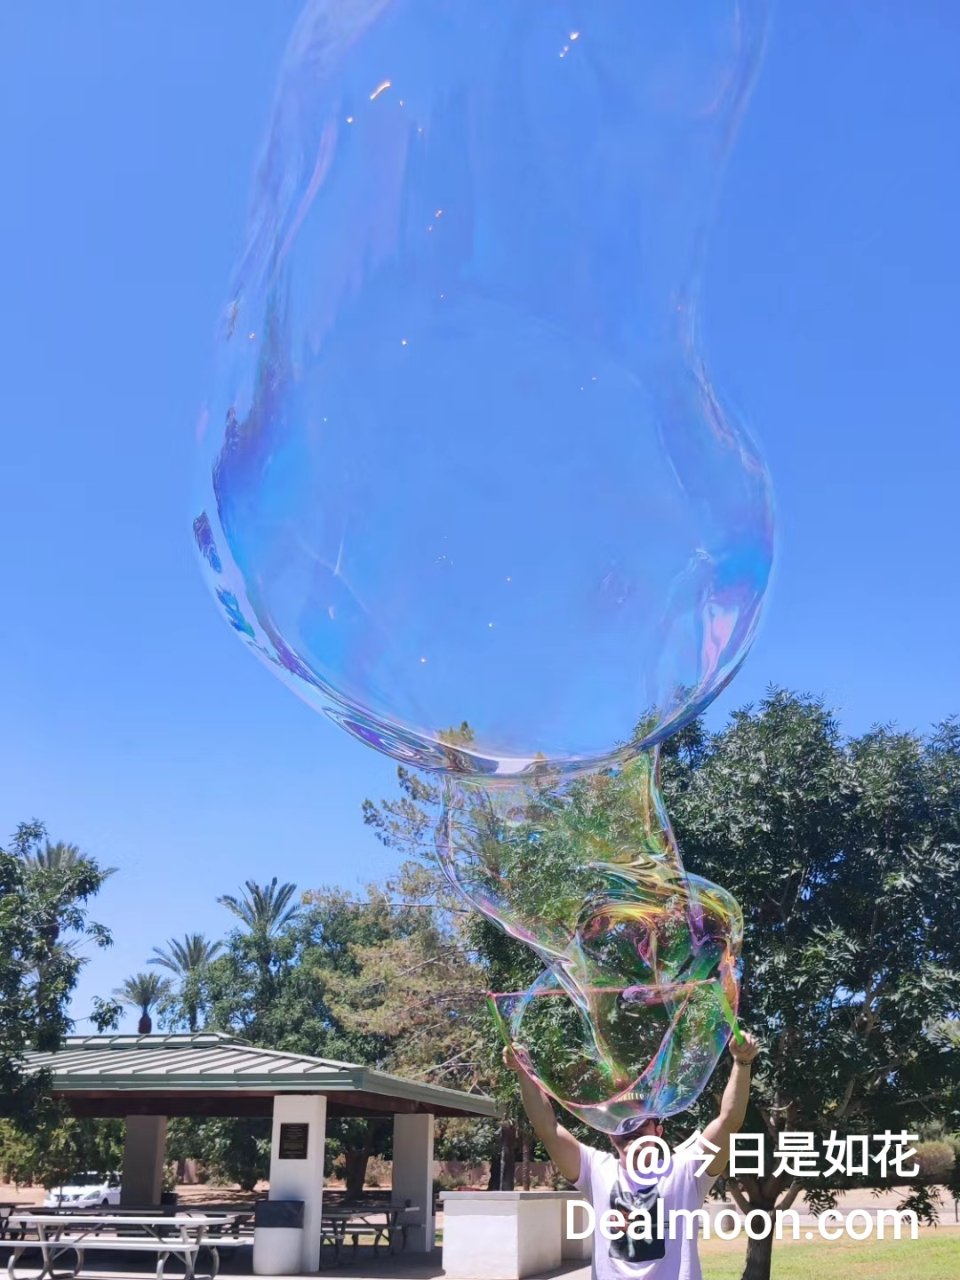 WOWMAZING Giant Bubble Wands Kit: (4-Piece Set) | Incl. Wand, Big Bubble Concentrate and Tips & Trick Booklet | Outdoor Toy for Kids, Boys, Girls | Bubbles Made in The USA - Standard Kit : Toys & Games